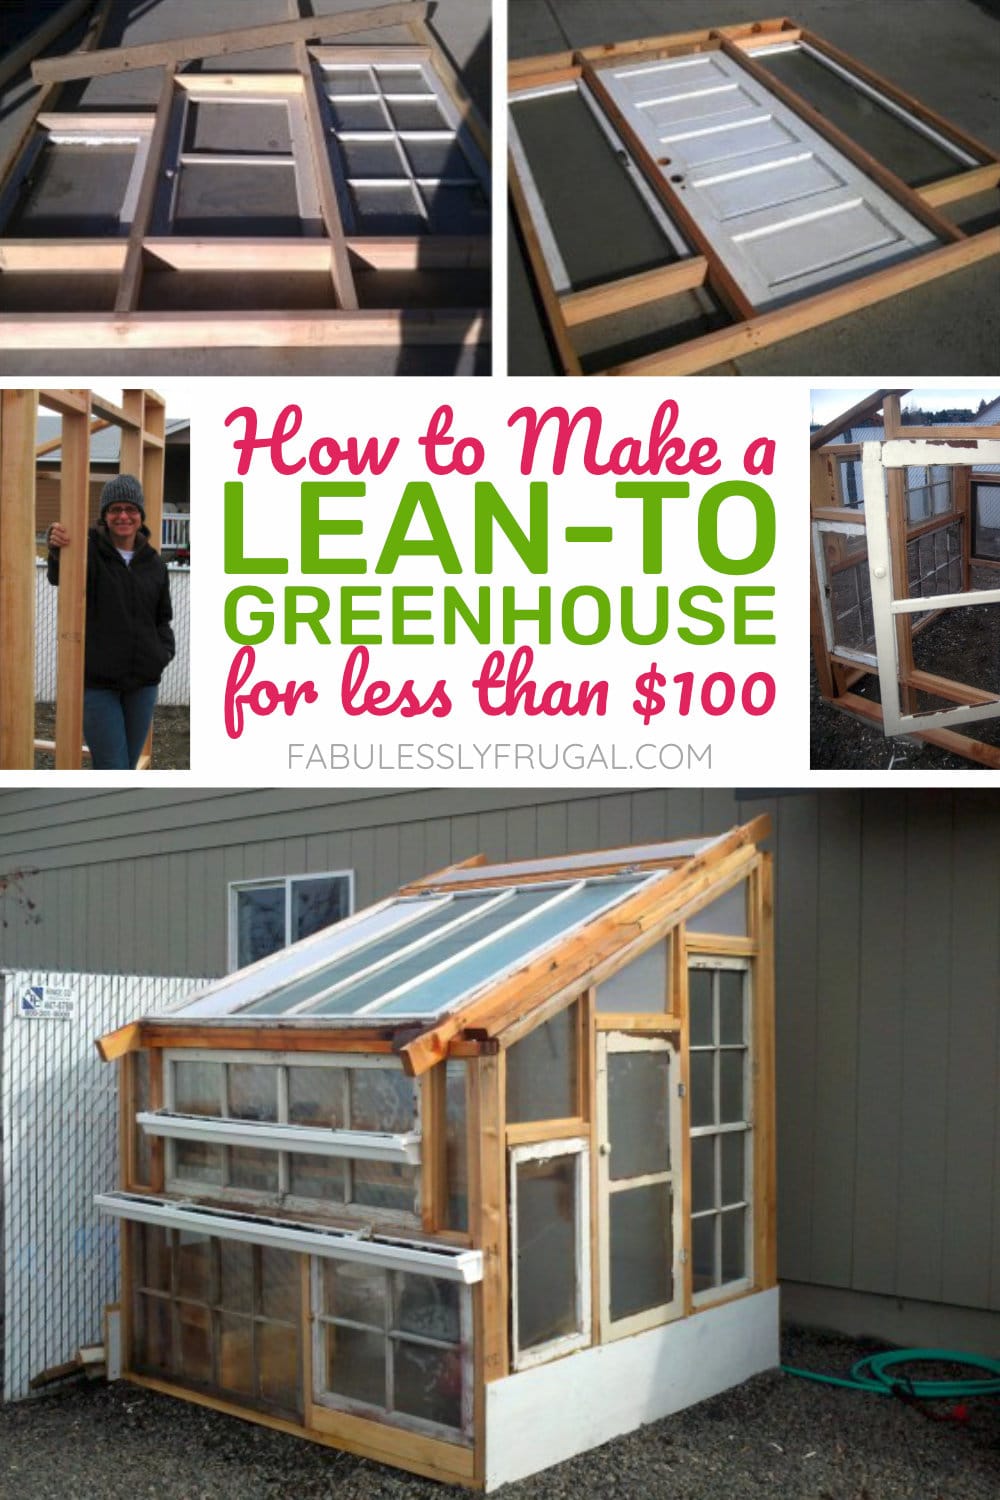 How to make a lean-to greenhouse for less than $100